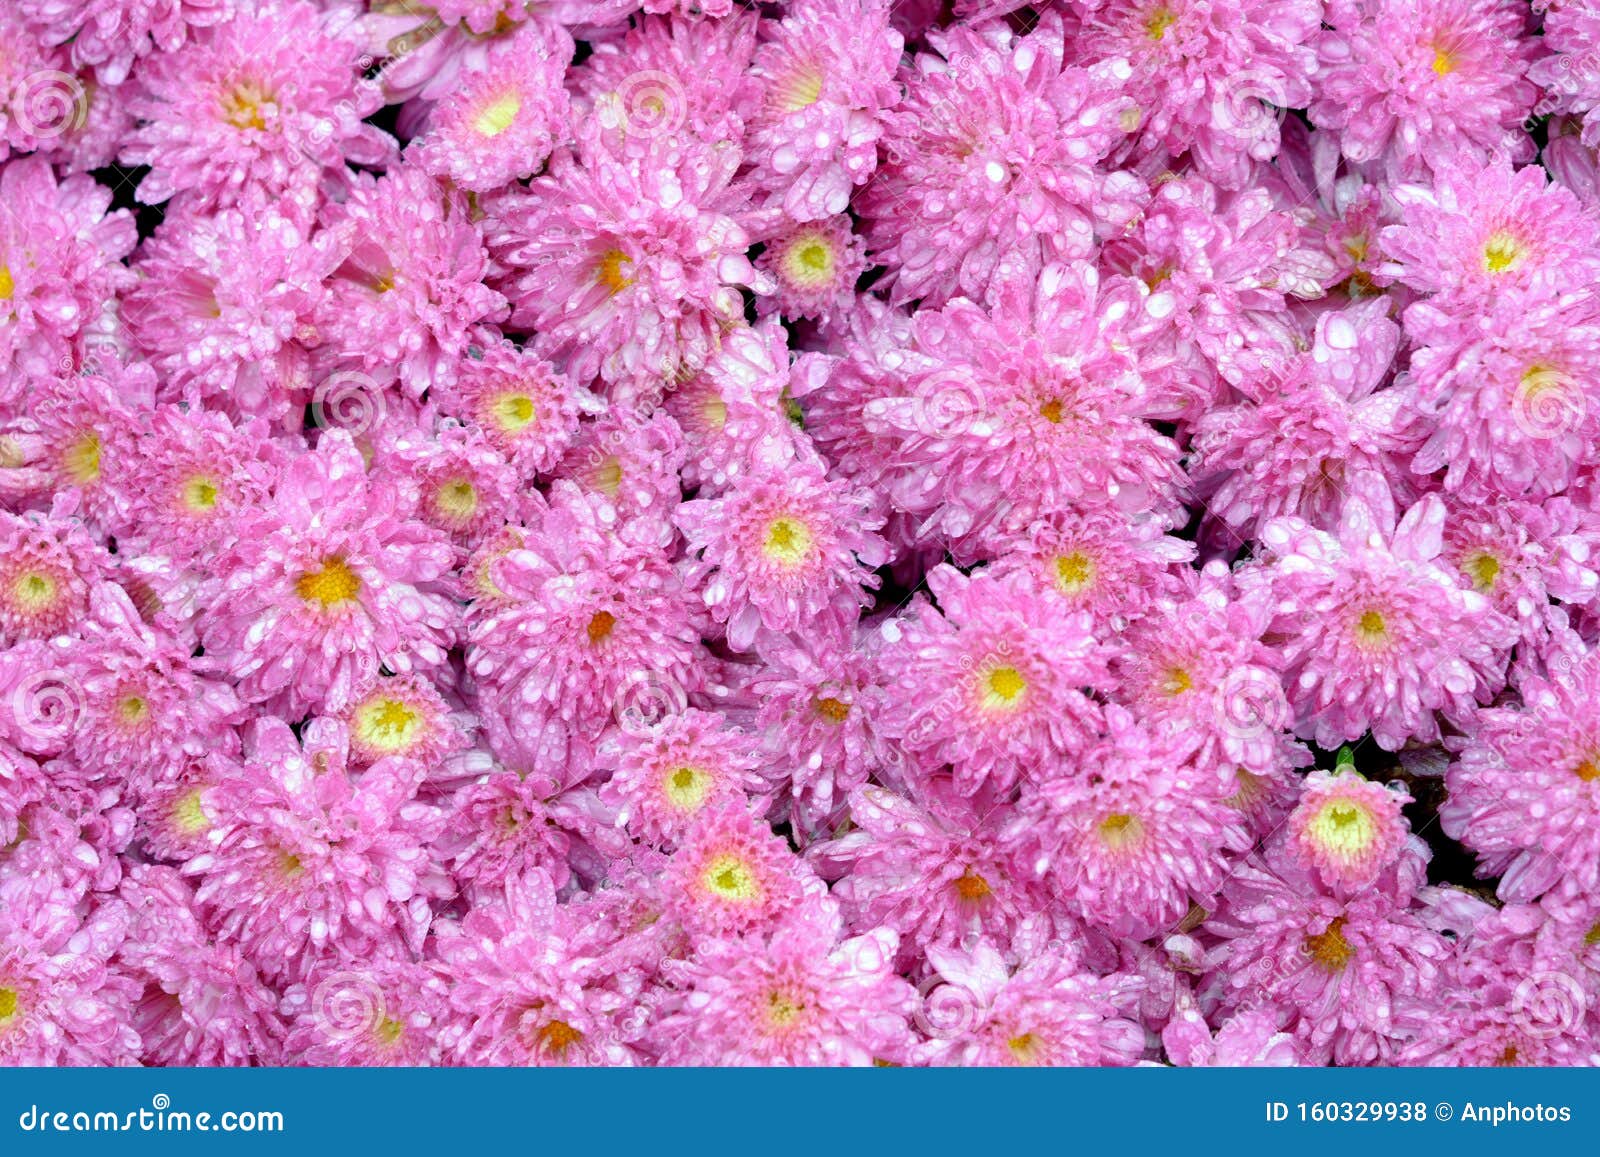 Pink mums bed stock photo. Image of leaves, group, fall - 160329938